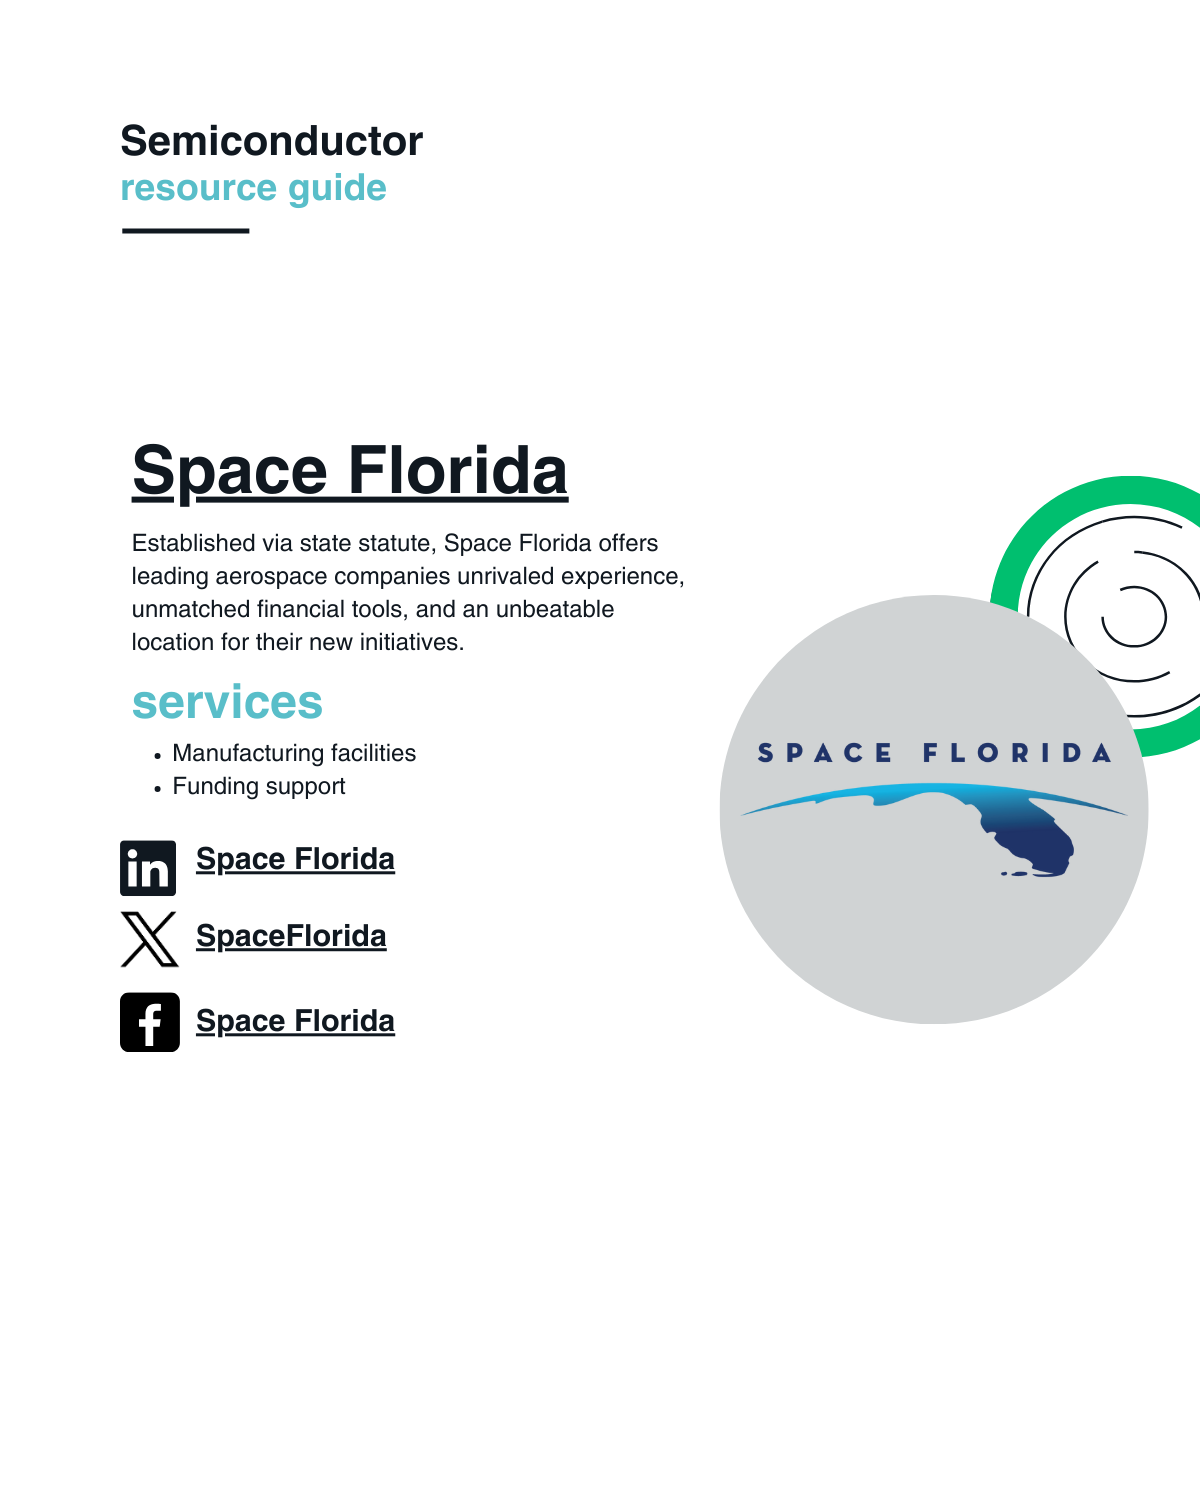 Established via state statute, Space Florida offers leading aerospace companies unrivaled experience, unmatched financial tools, and an unbeatable location for their new initiatives.